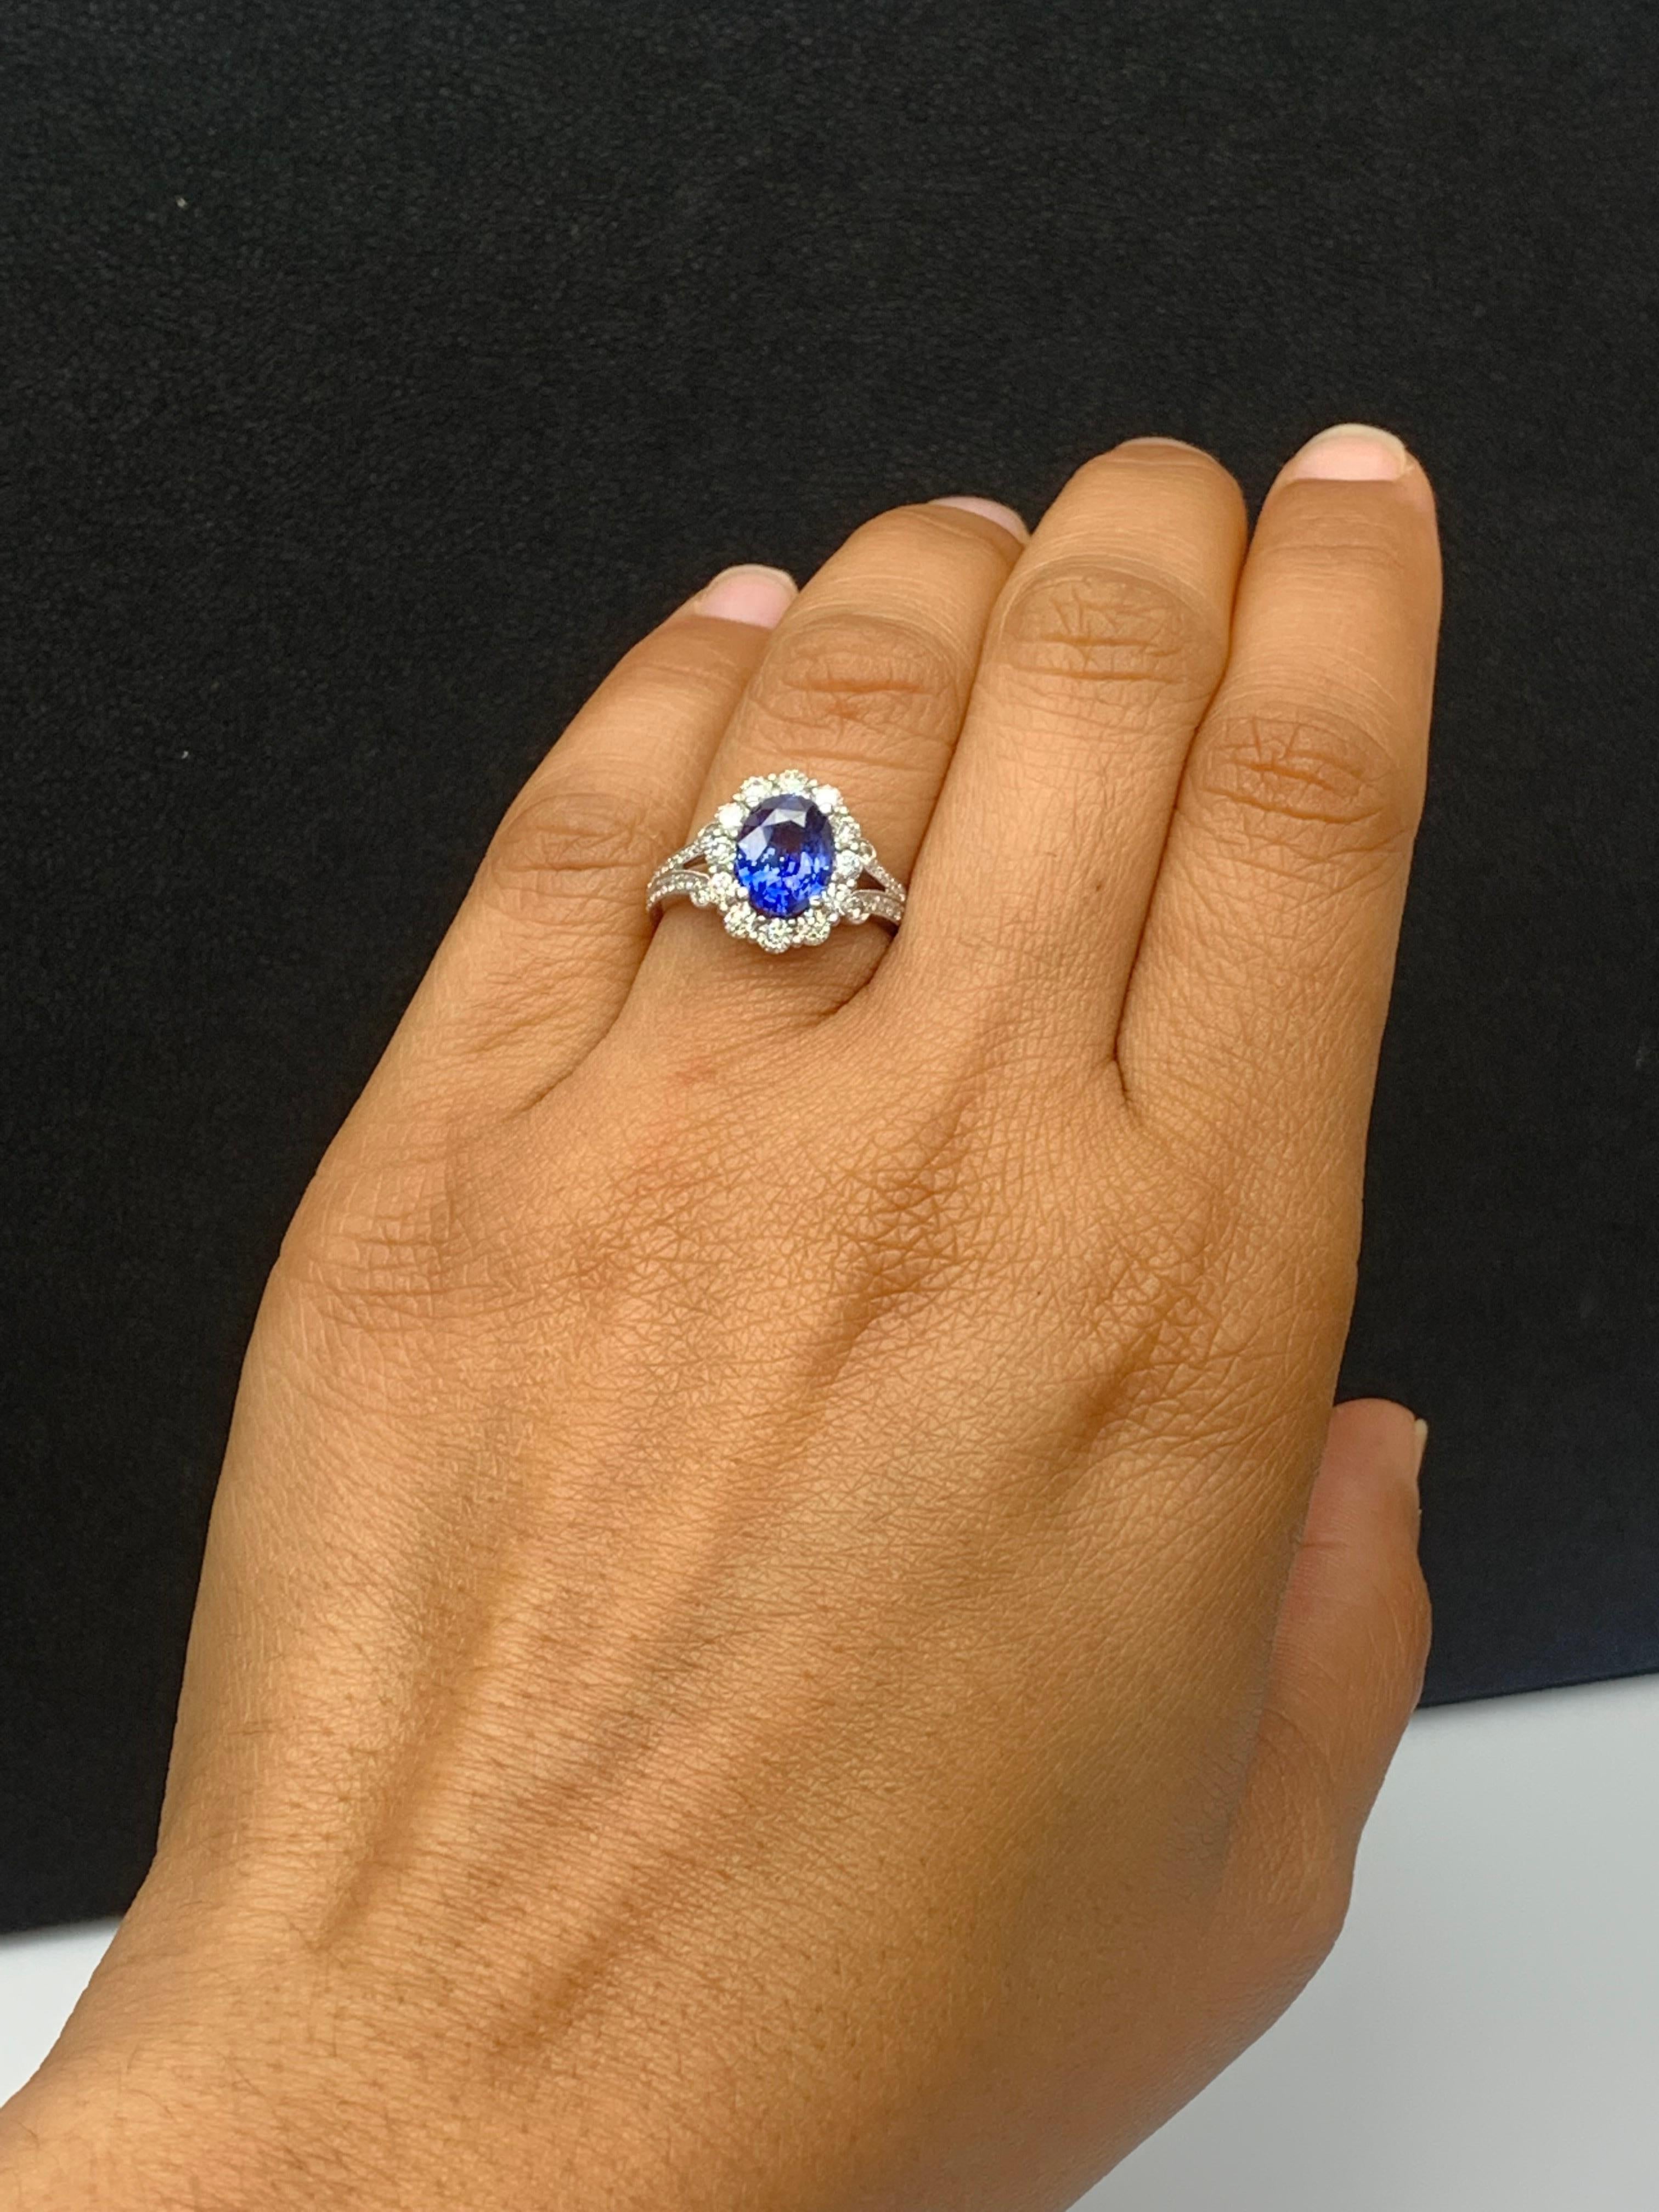 2.18 Carat Oval Cut Sapphire and Diamond Ring in 18k White Gold For Sale 3